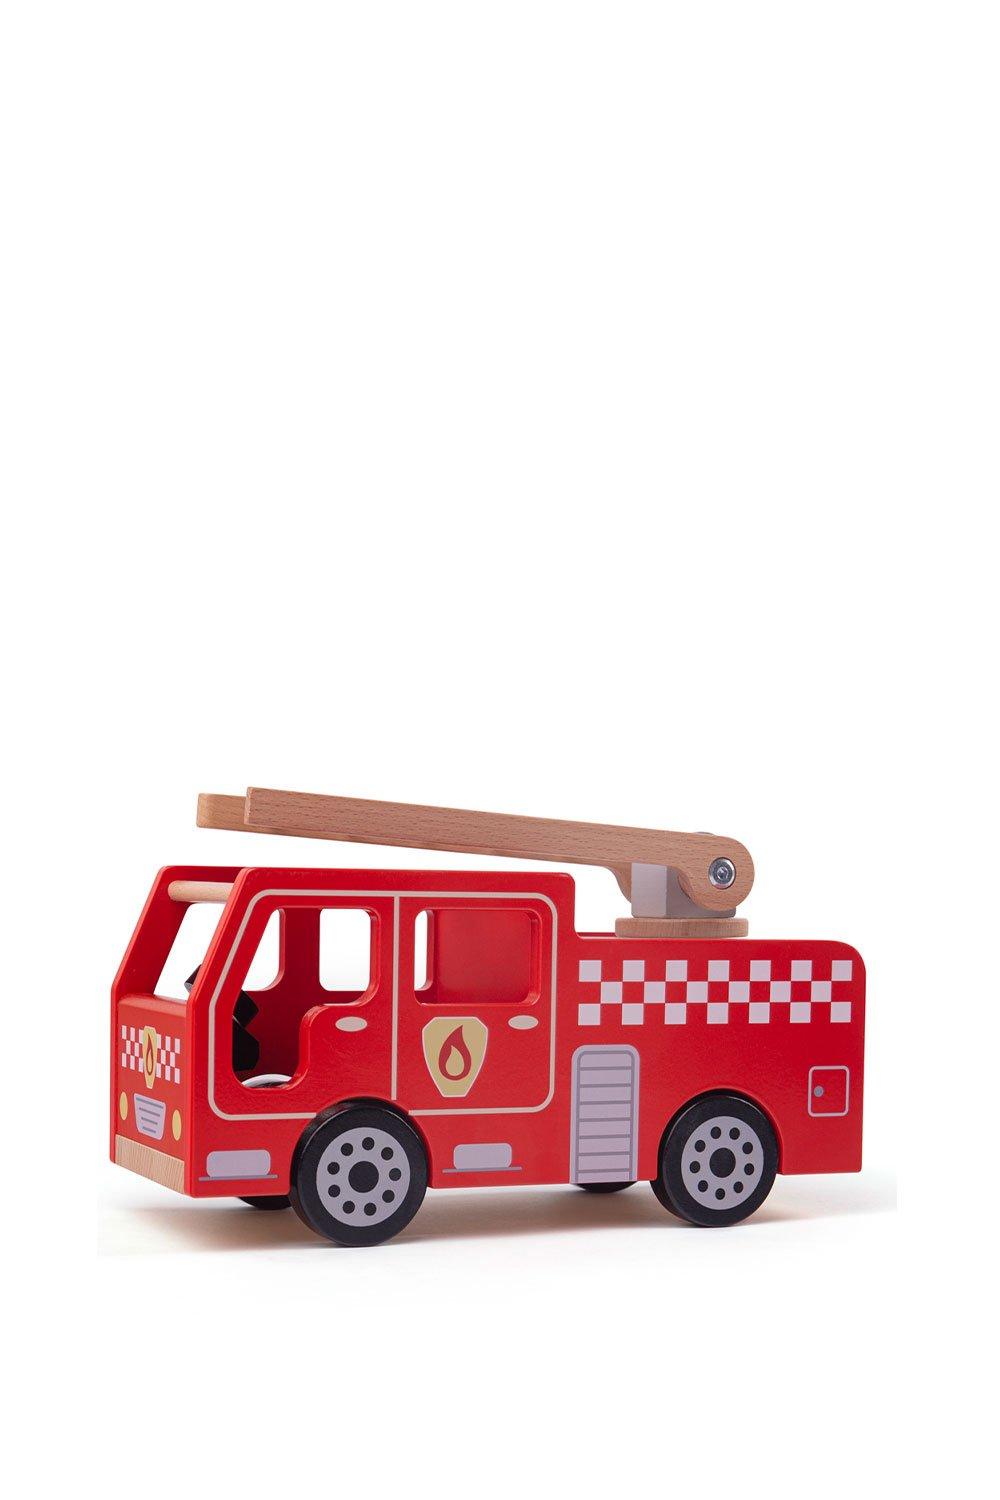 Bigjigs Toys City Fire Engine|red